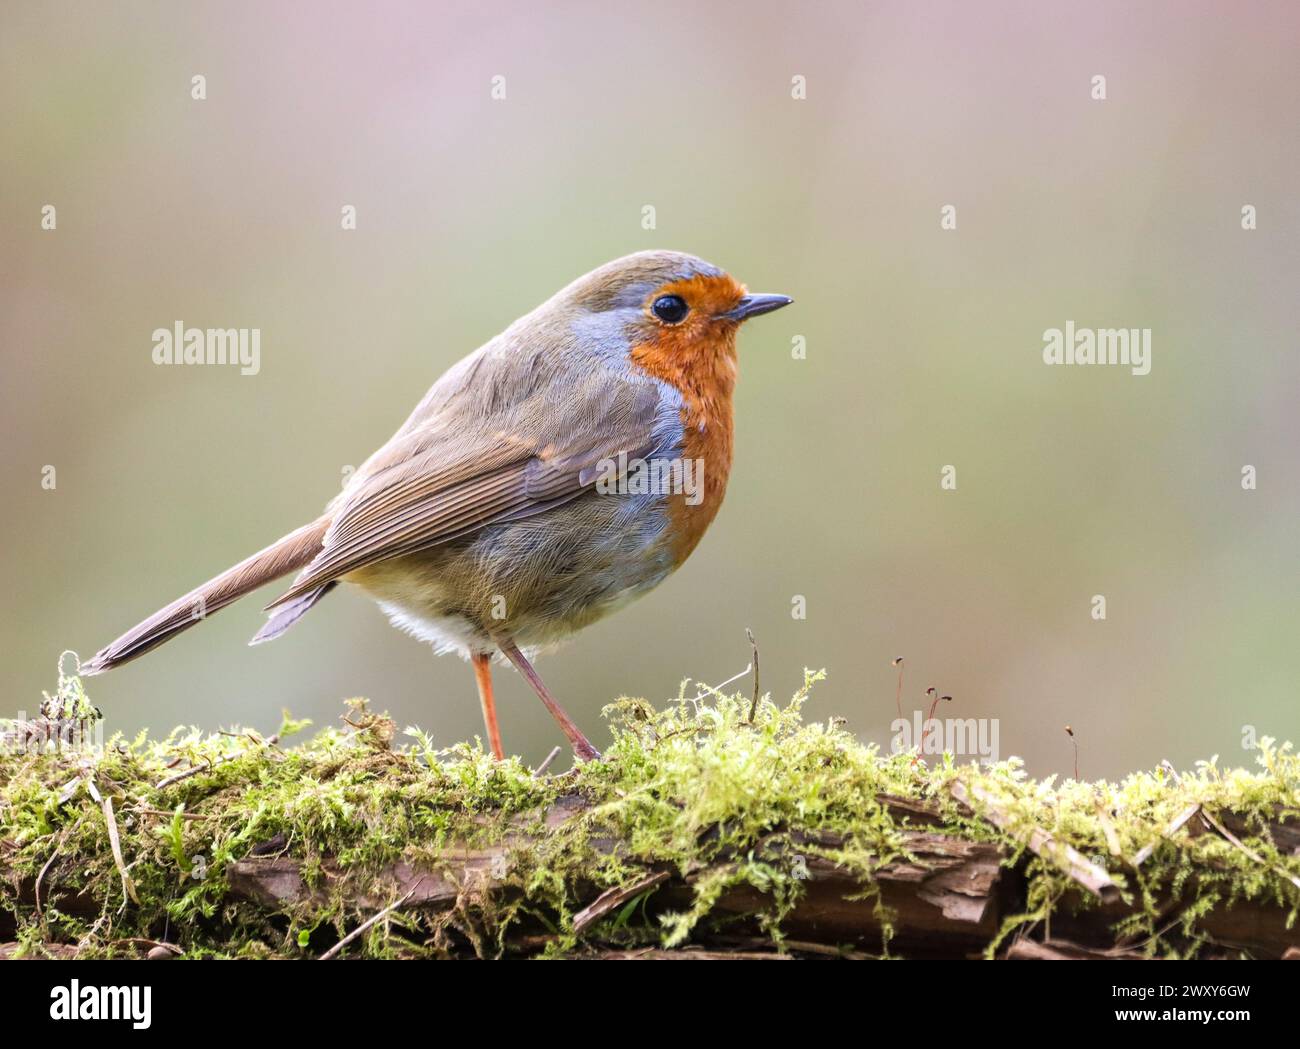 A selective focus shot of a robin bird perched on a tree branch Stock Photo